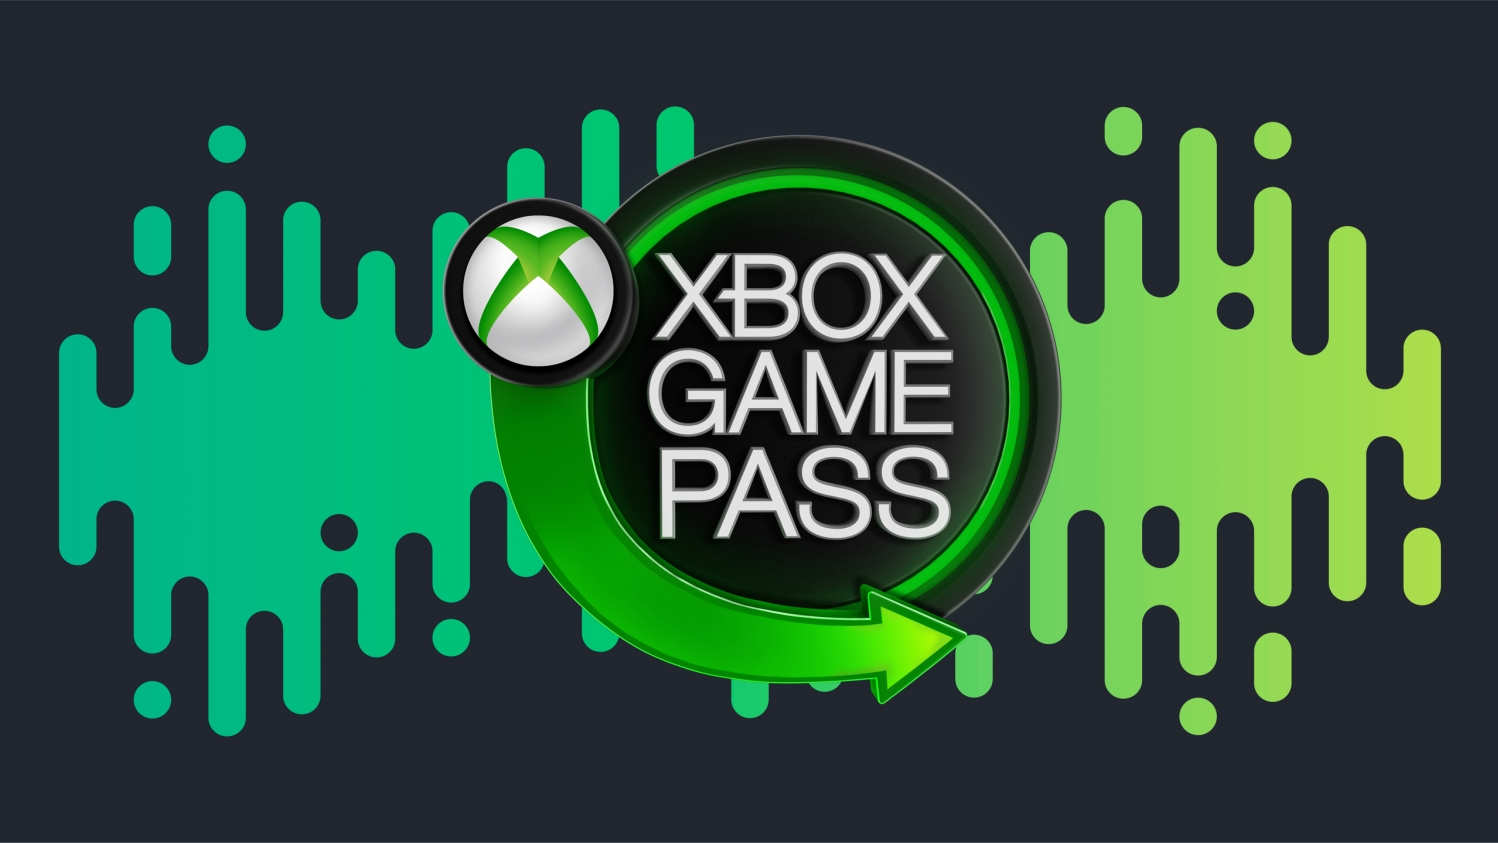 Xbox Game Pass made $2.9 billion last year, according to Brazil Activision  filings 